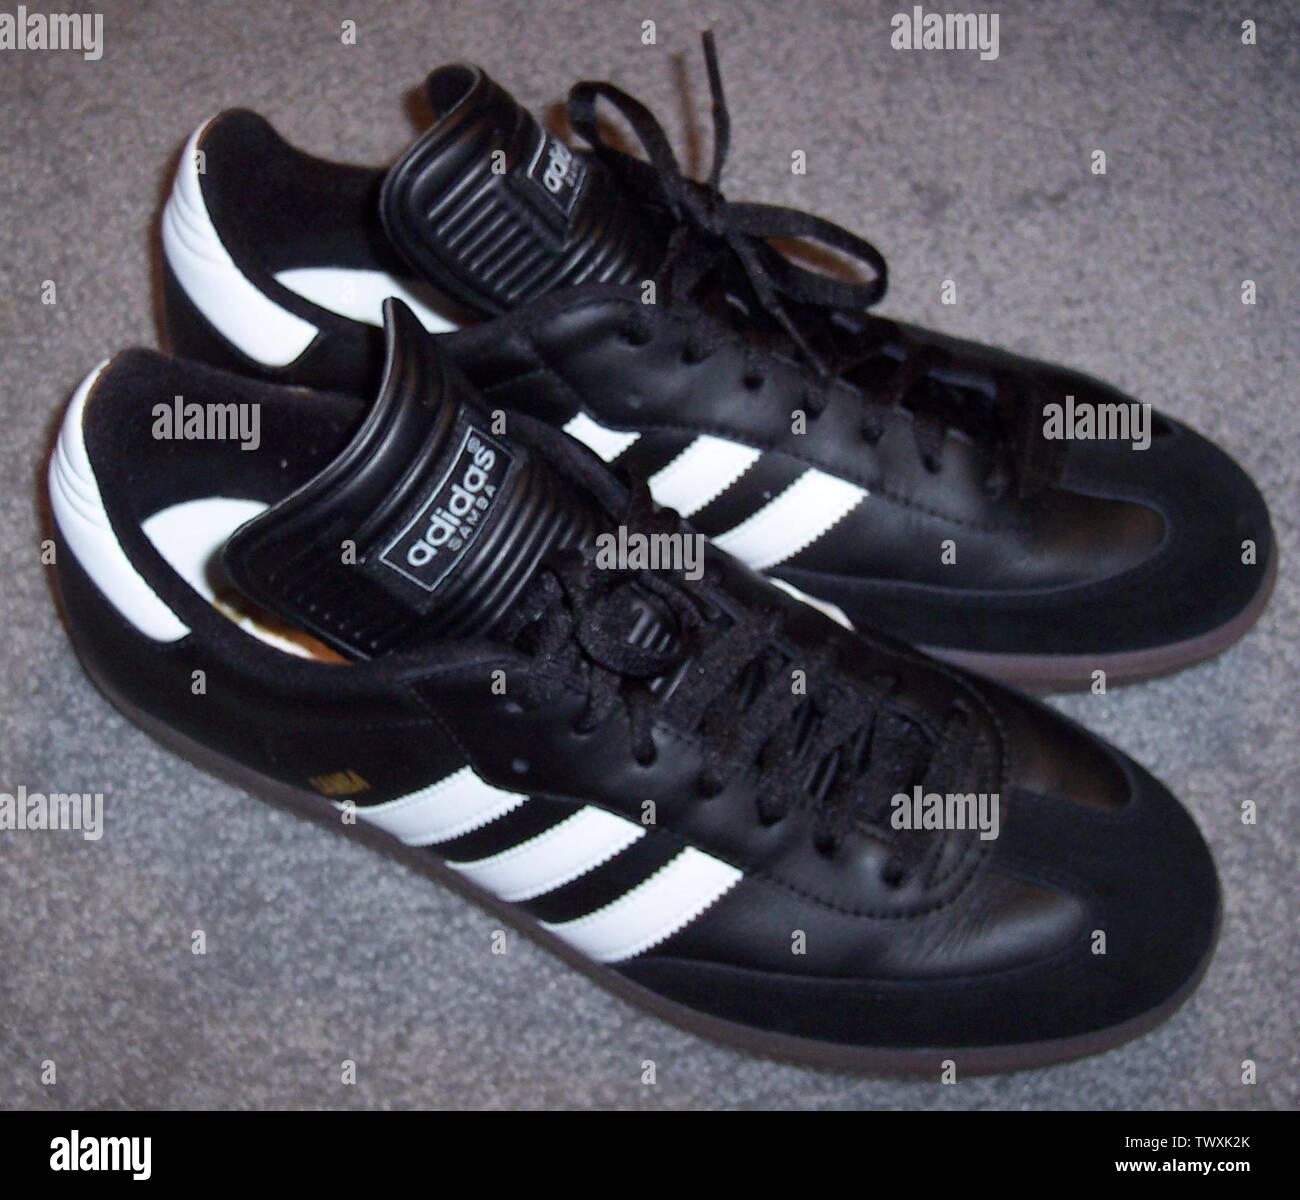 Adidas photography and images - Alamy